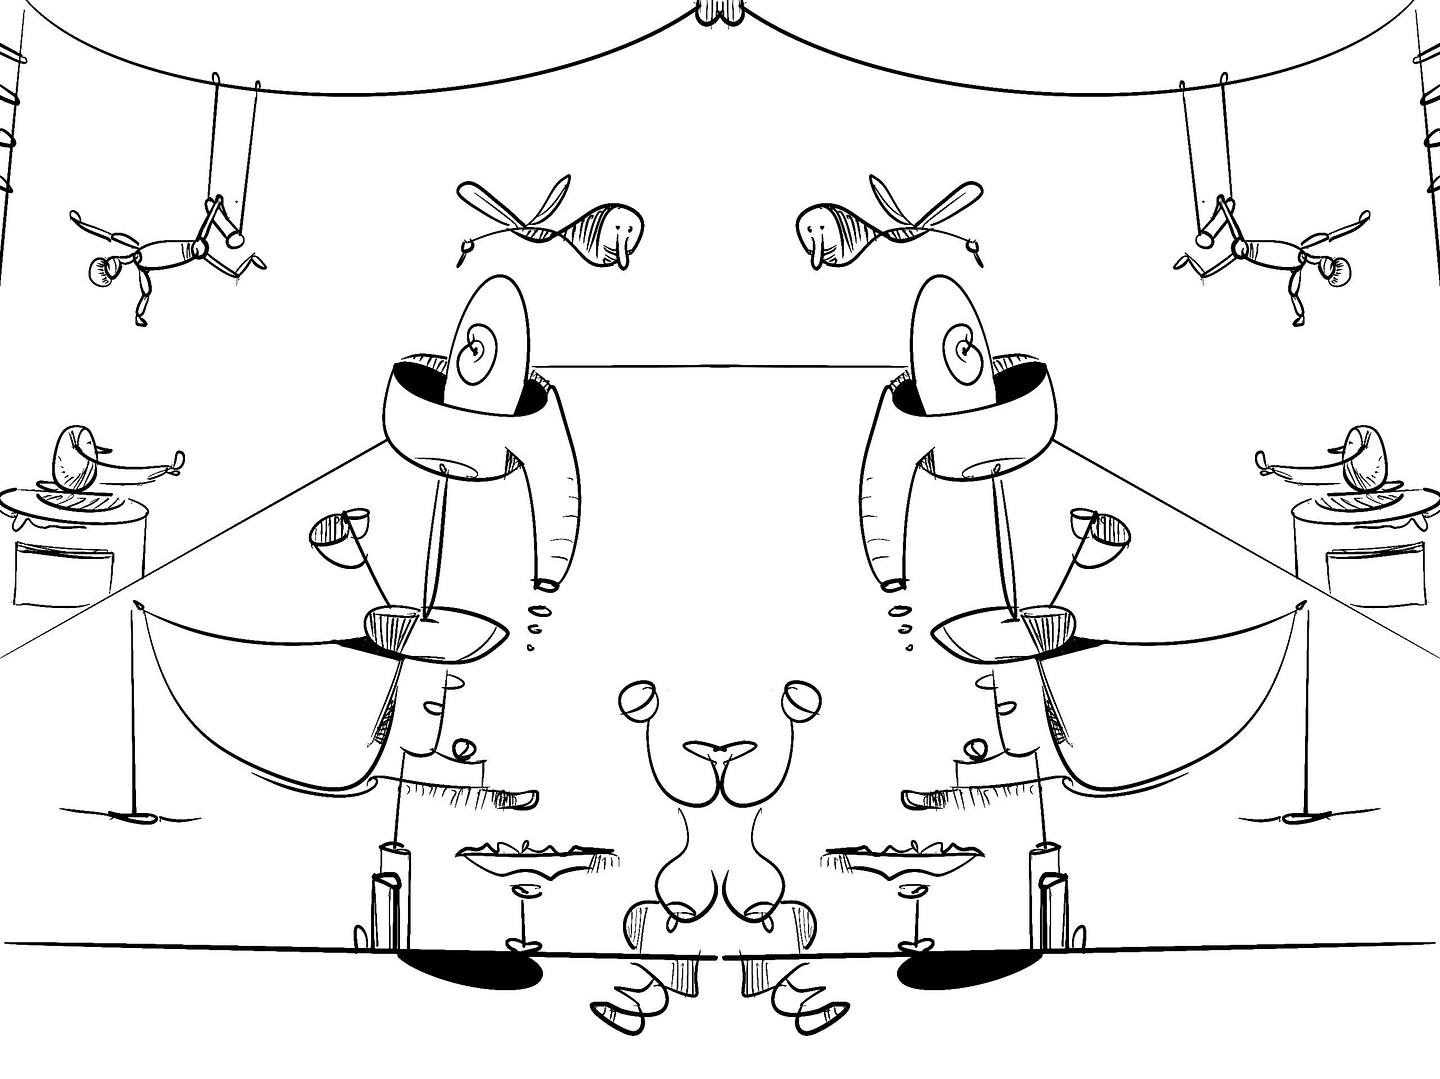 Circus tent environment with imaginative figures